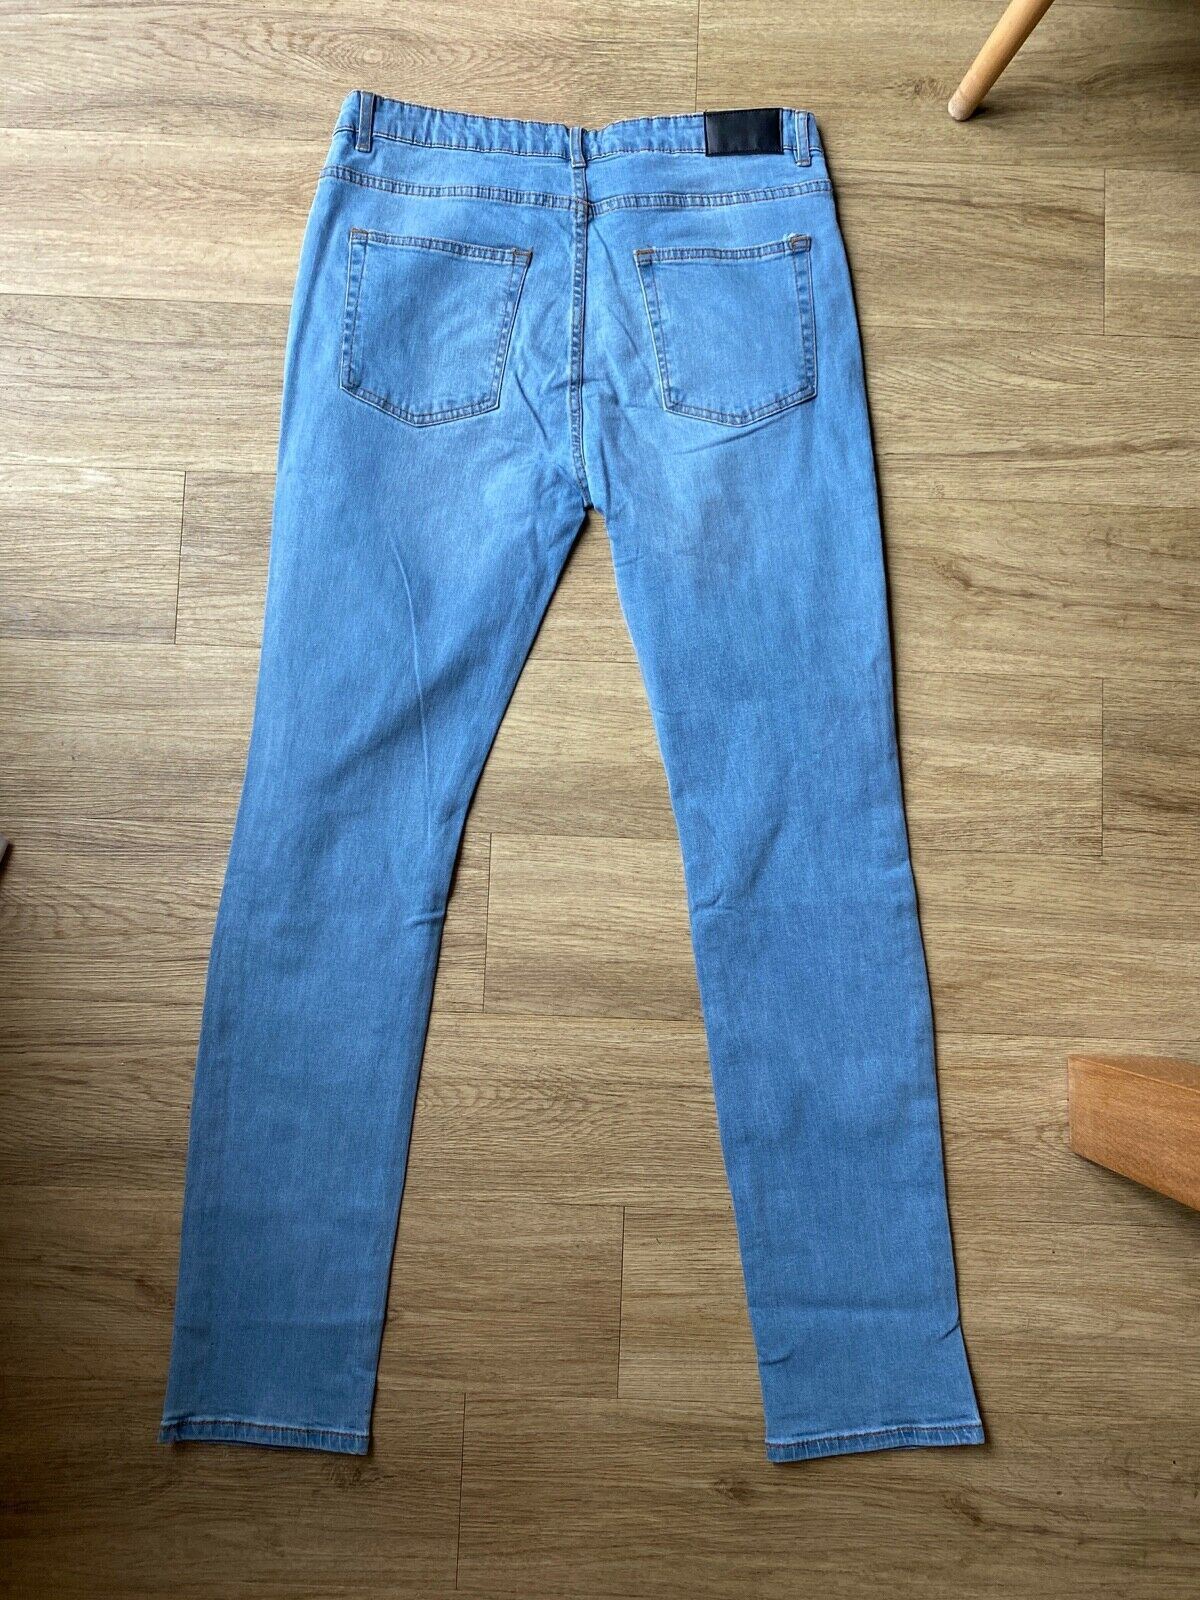 Another Influence Light Blue Jeans Size W36 R L32" Ripped Knees